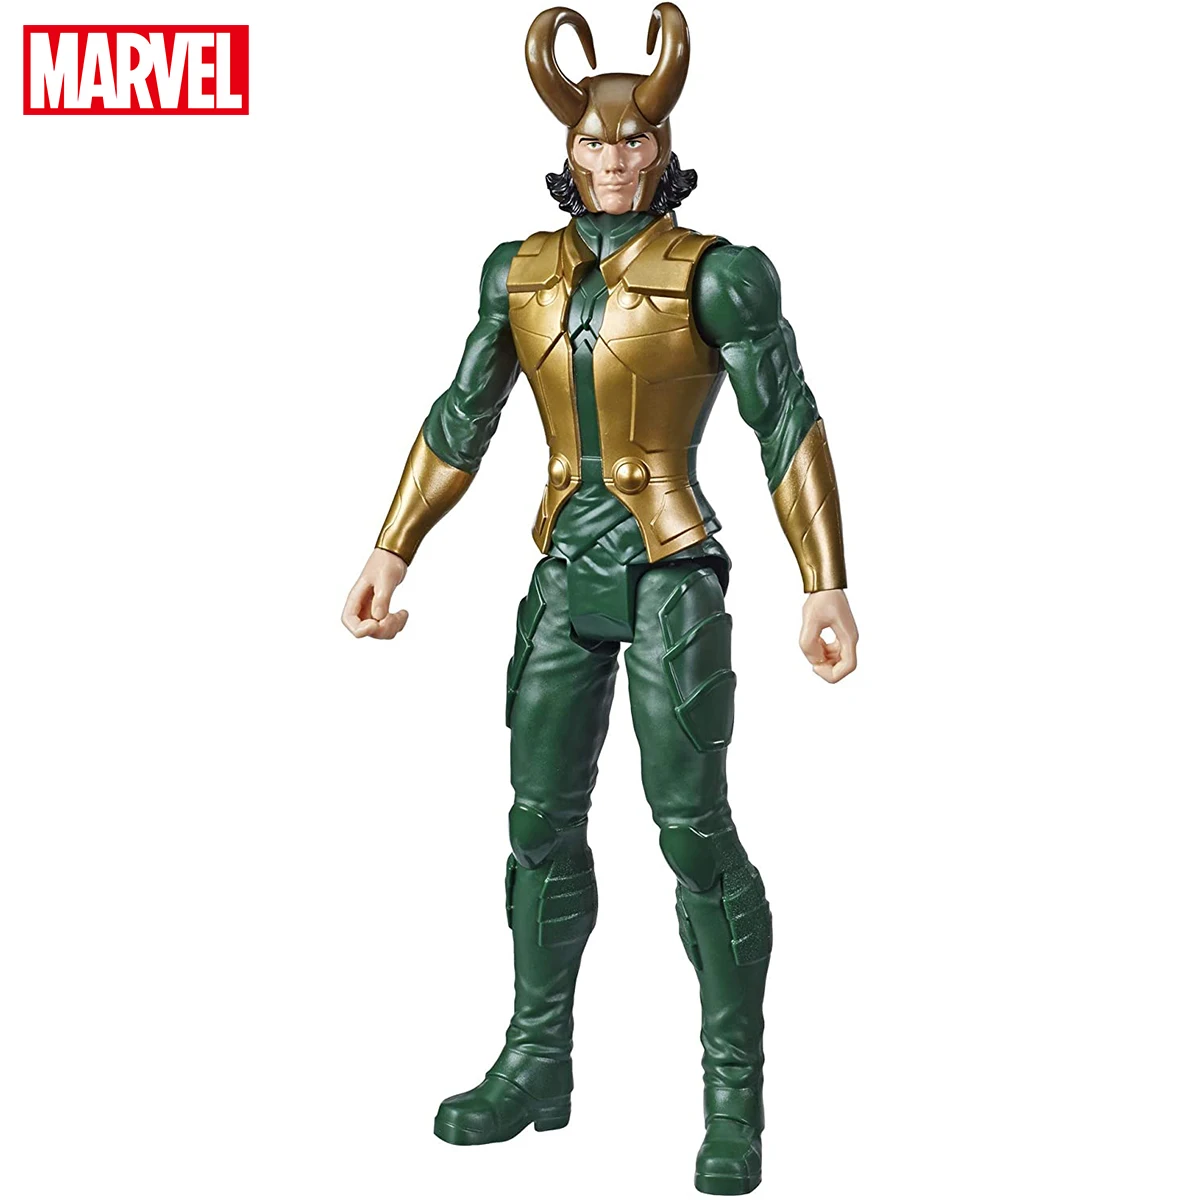 

Avengers Marvel Titan Hero Series Rocky Doll Blast Gear Christmas Gift 12-inch toy, suitable for 4 years old and above E7874